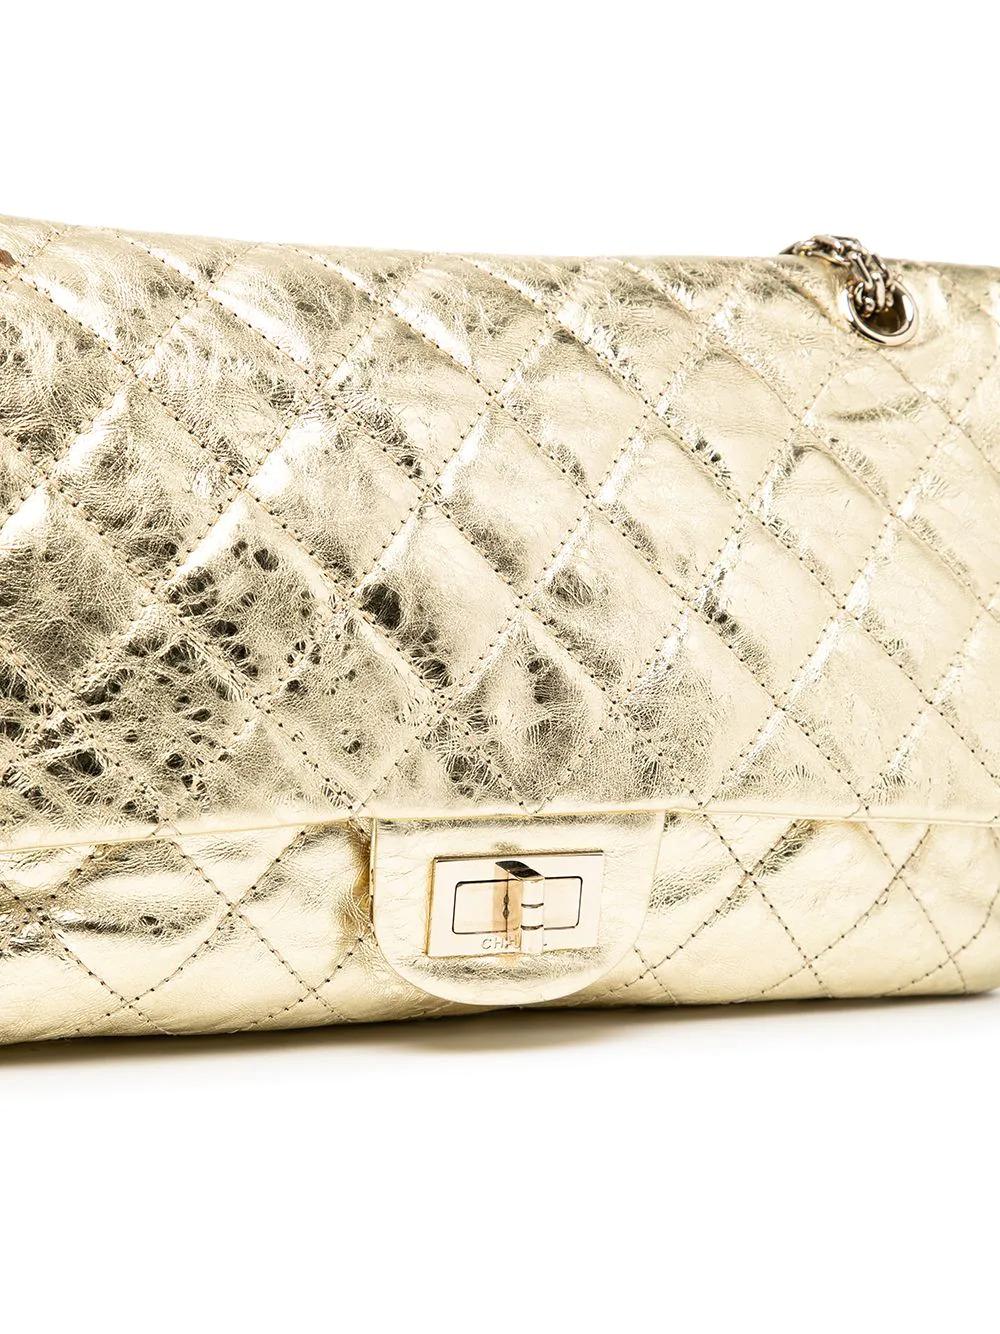 A true investment bag from Chanel that will stand the test of time. This gorgeous pre-owned Chanel Gold 2.55 Reissue Jumbo Flap Bag from 2006-2008 has been crafted from diamond-quilted gold-tone leather and features a mademoiselle turn-lock closure